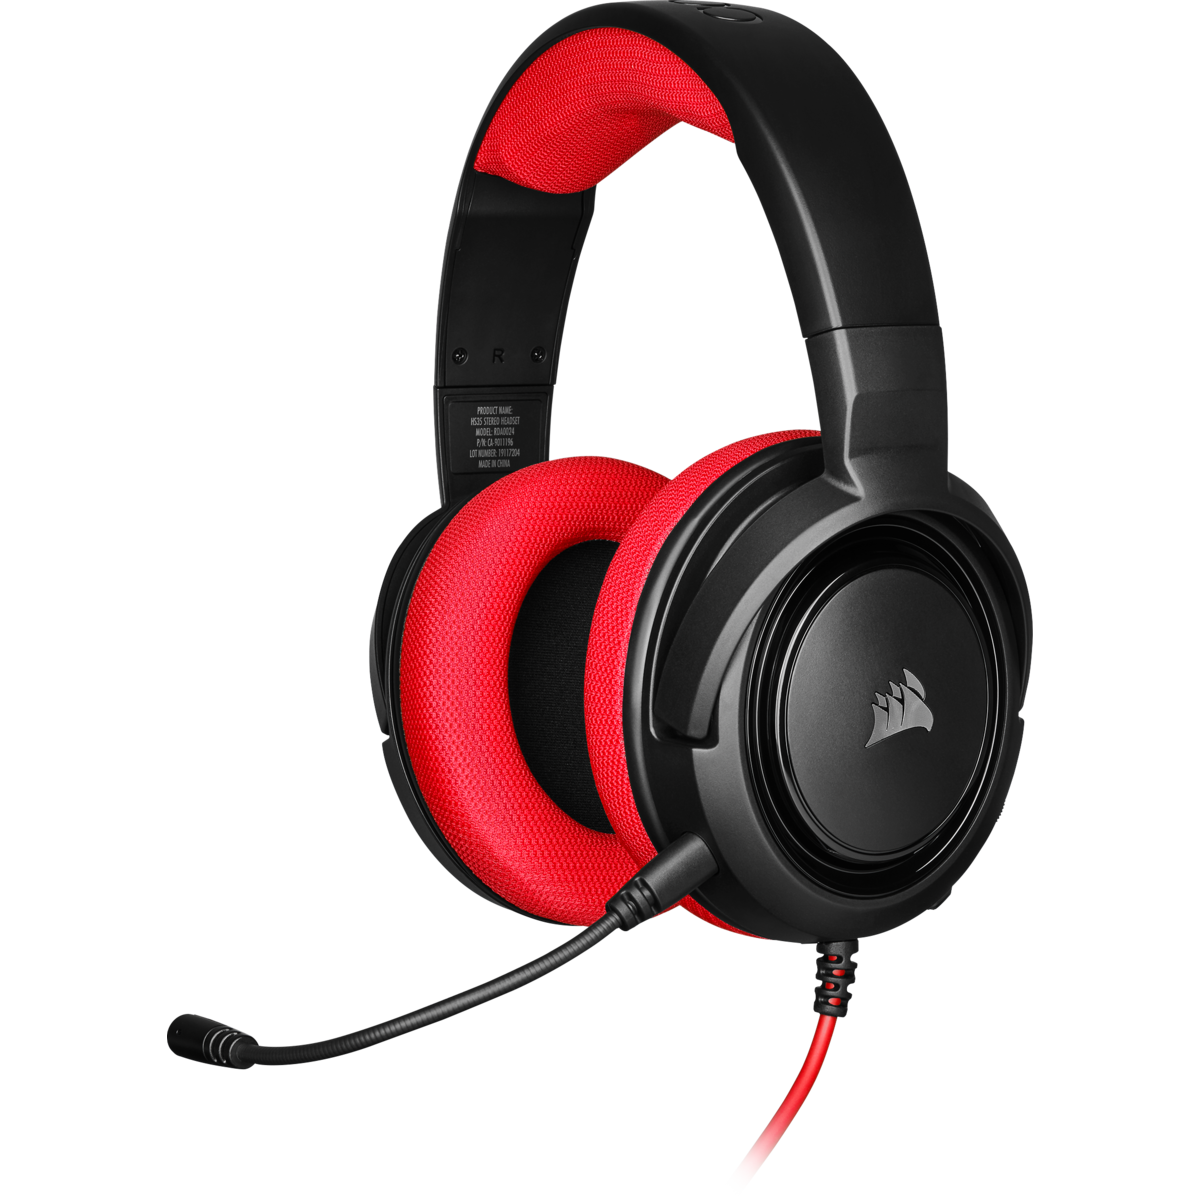 HEADSET CORSAIR HS35 STEREO GAMING RED 3.5 MM CA-9011198-NA